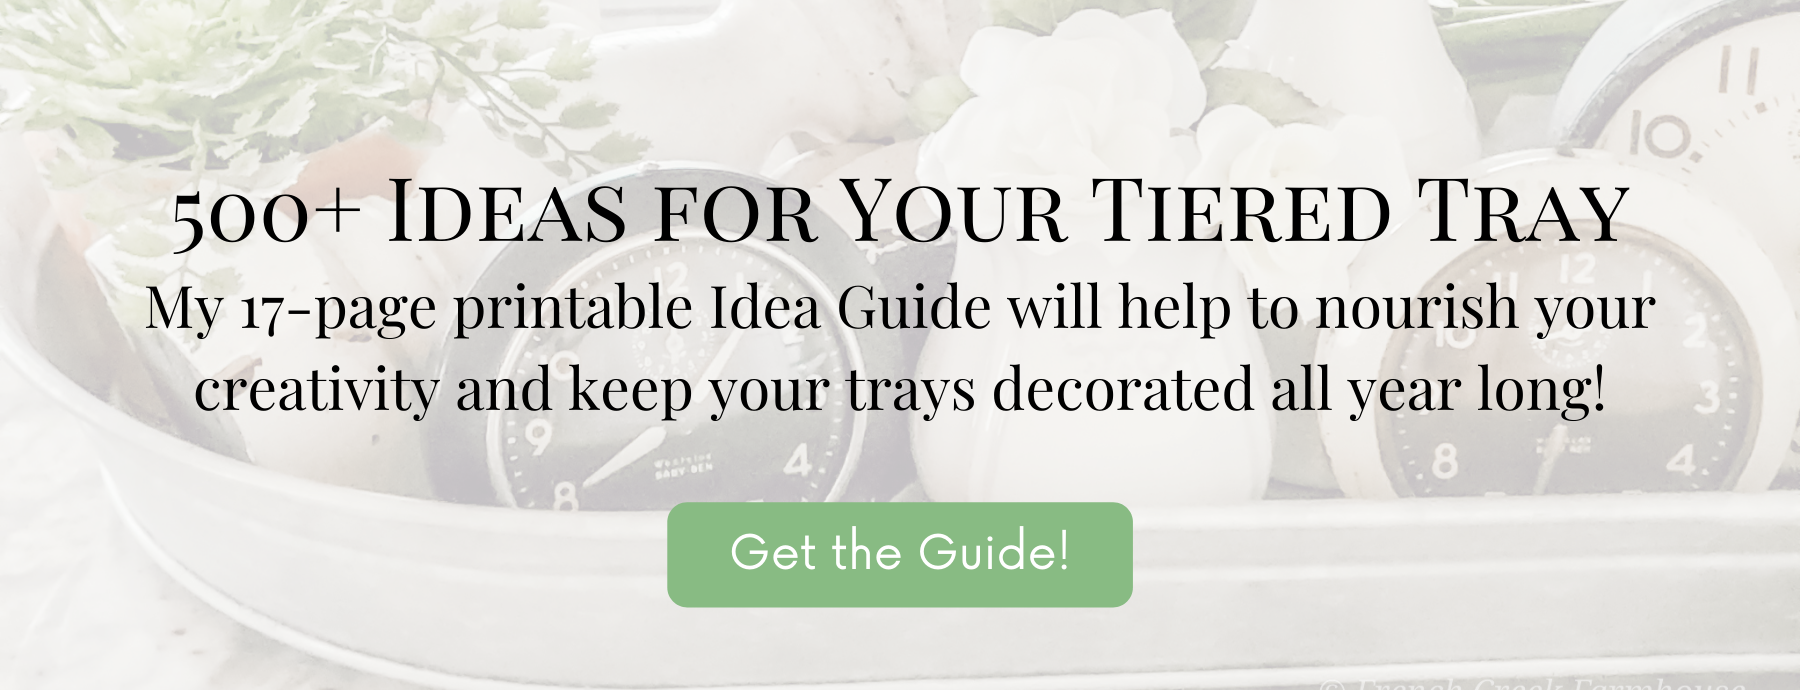 This 17-page printable guide will give you loads of ideas for decorating your tiered tray all year long